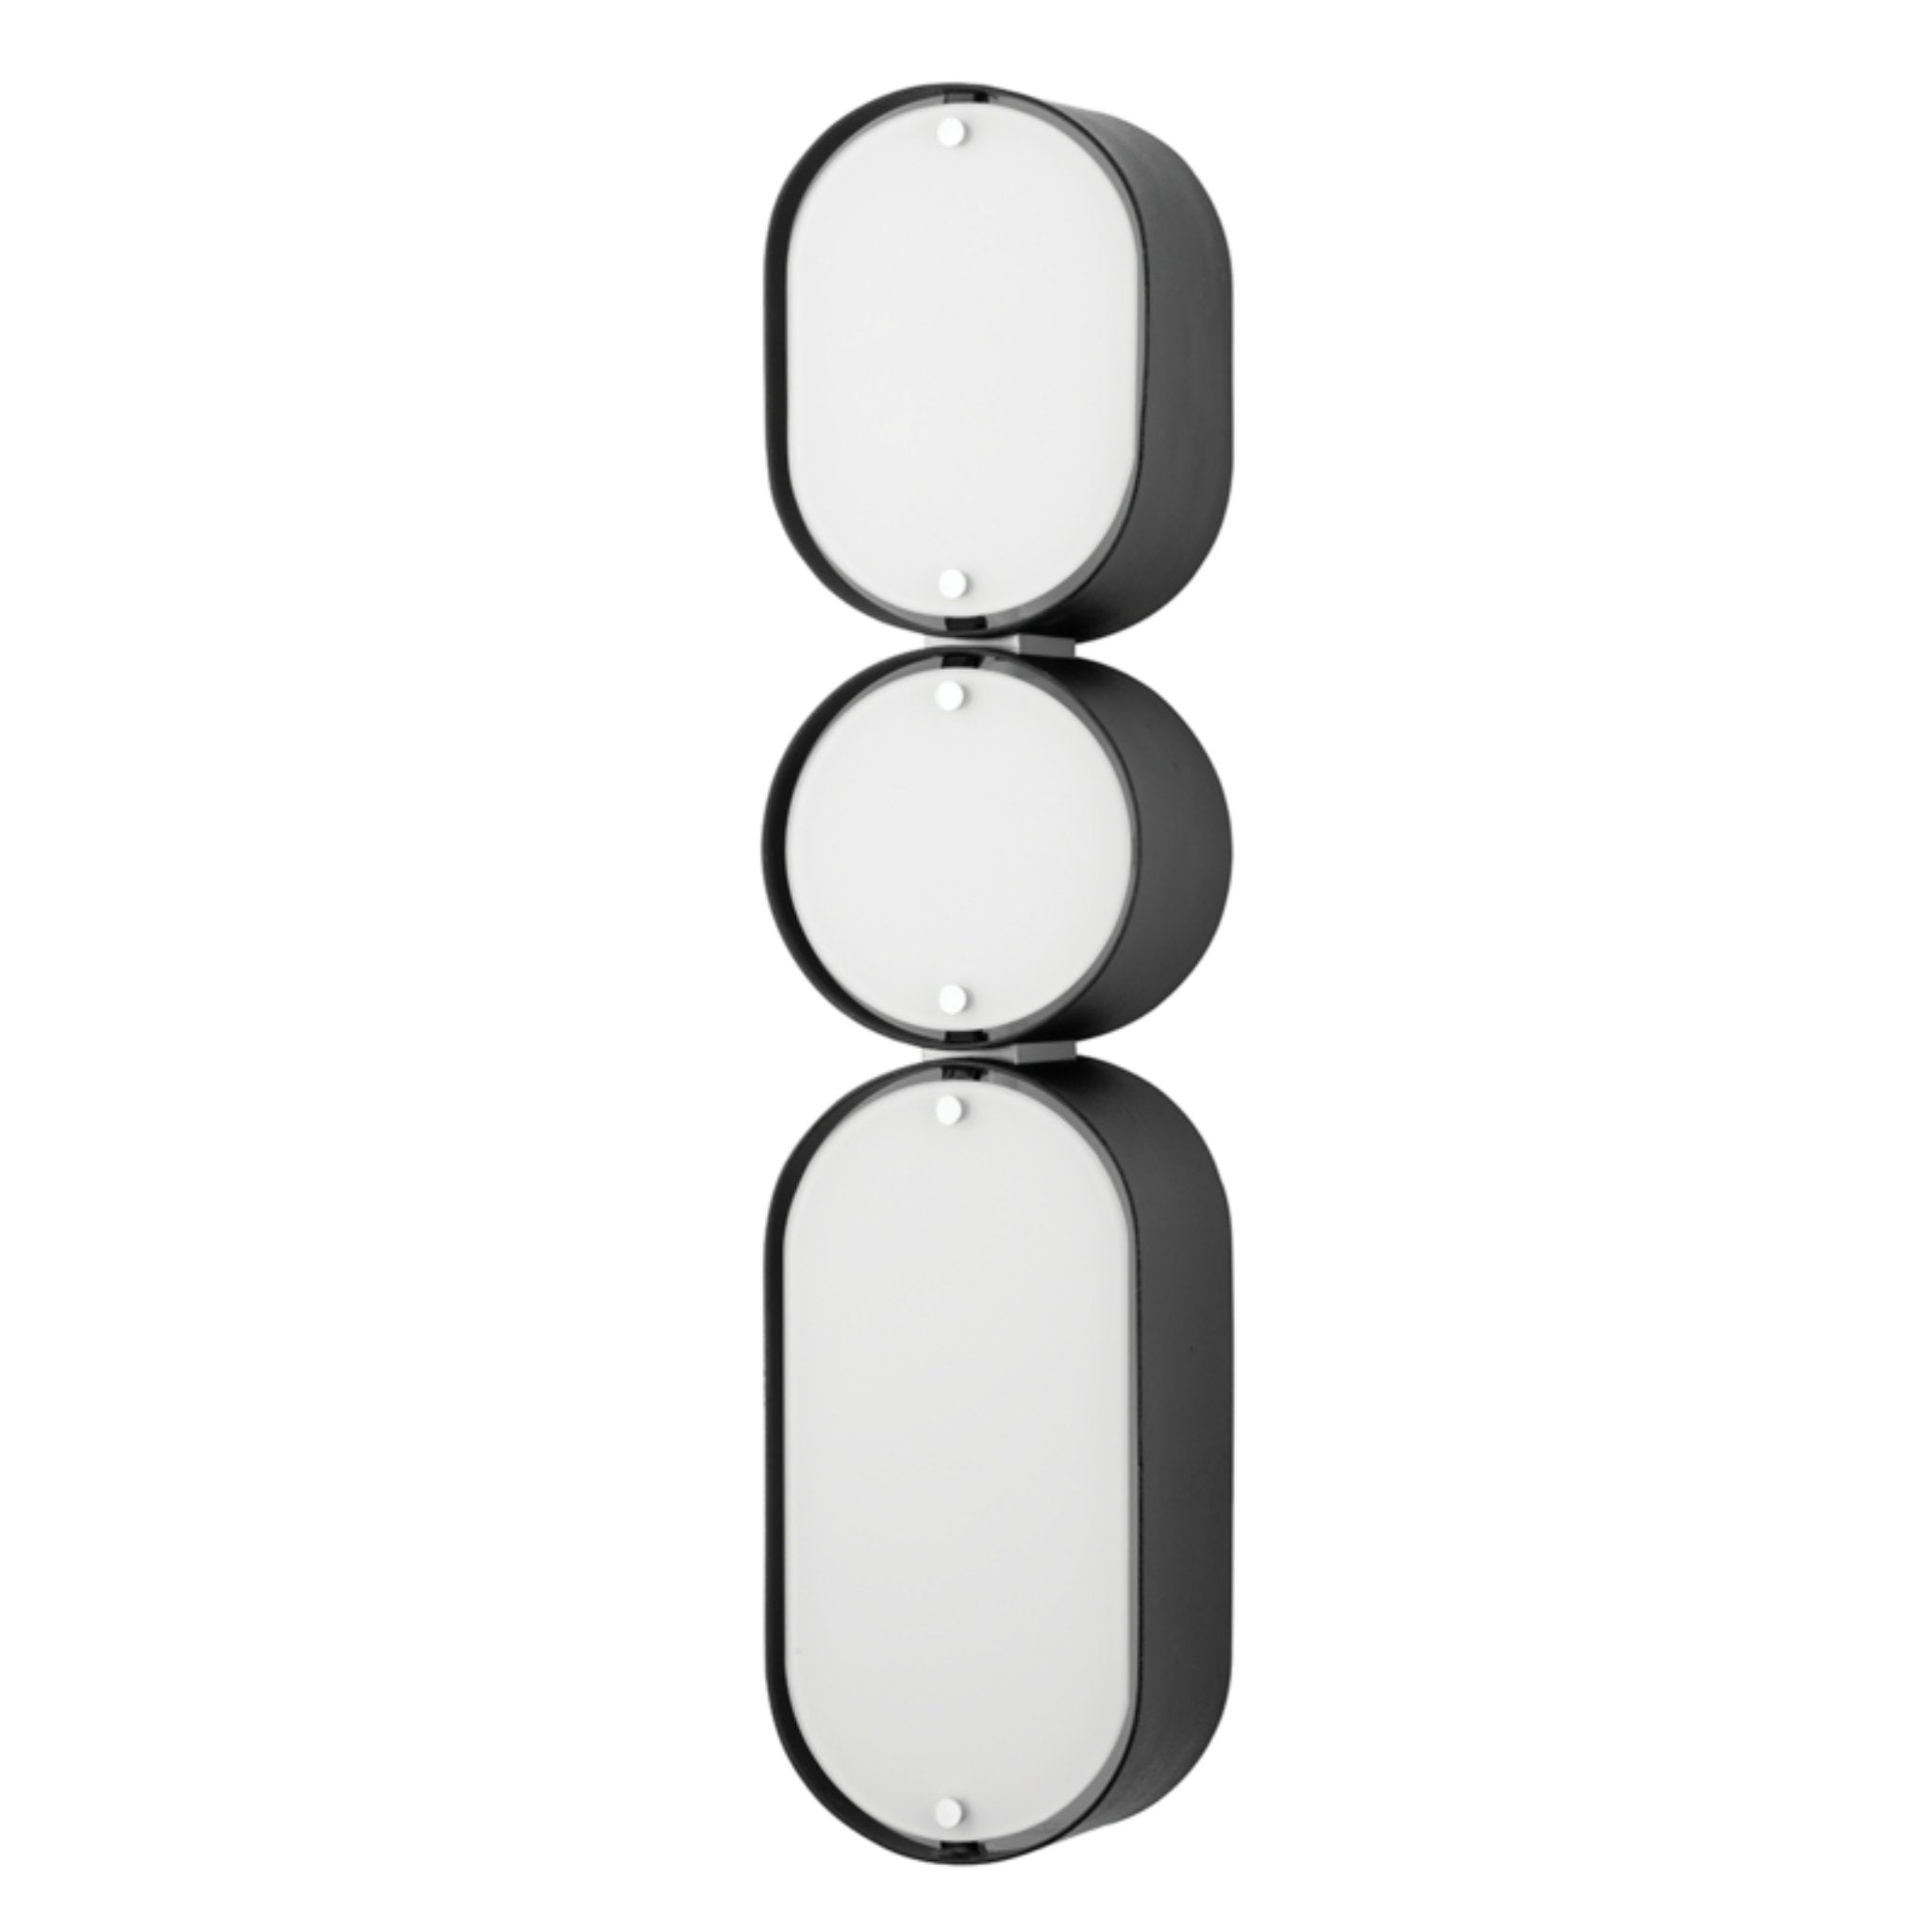 Opal 3 Light Wall Sconce in Soft Black With Stainless Steel